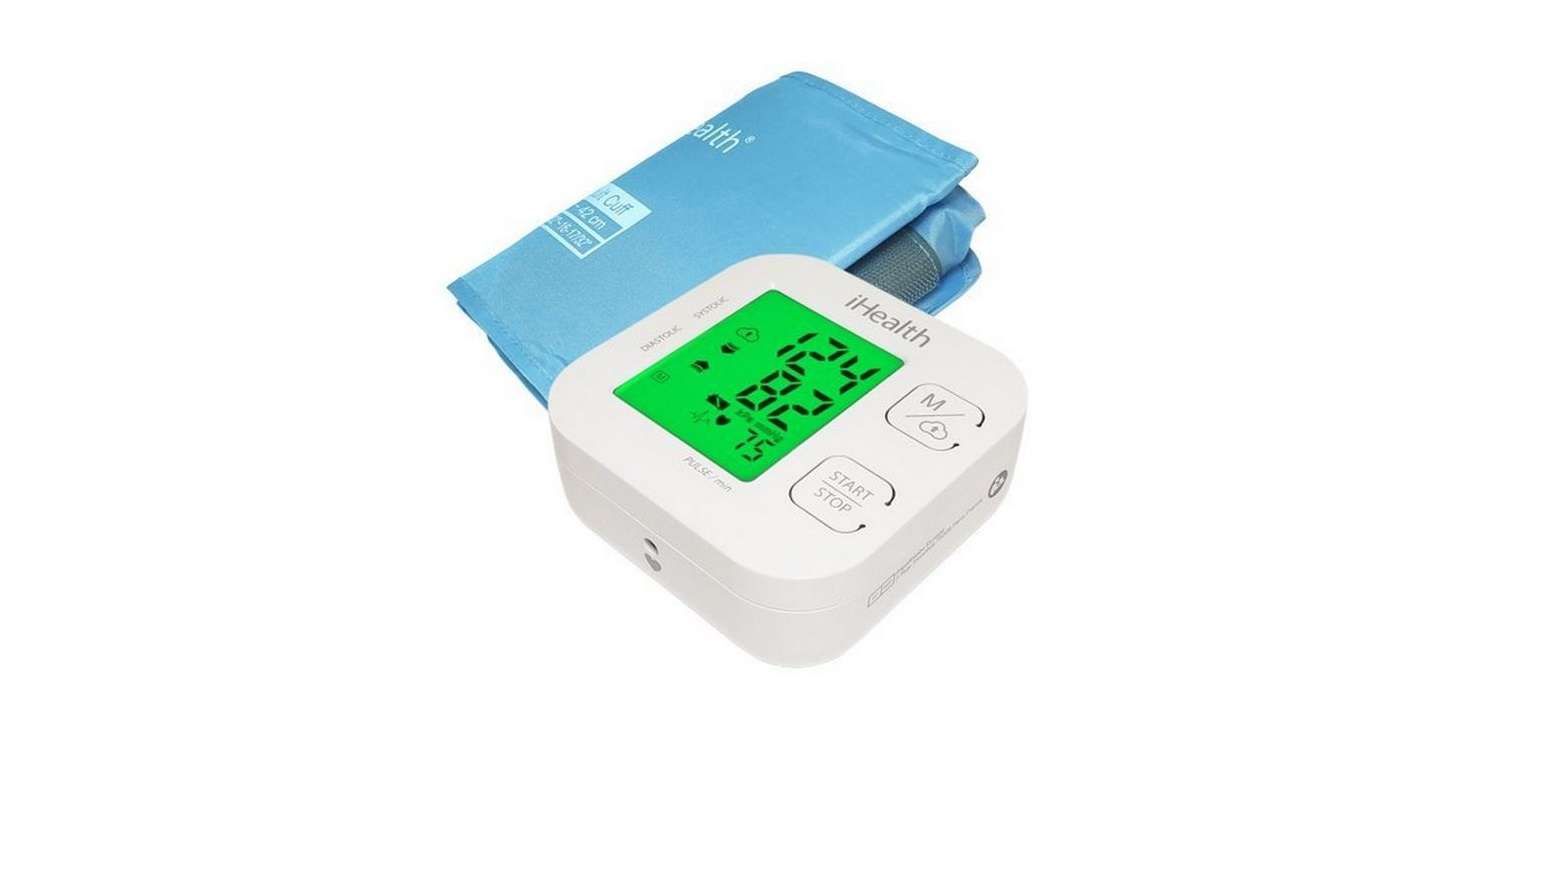 iHealth Track Smart Upper Arm Blood Pressure Monitor user Manual - feature image